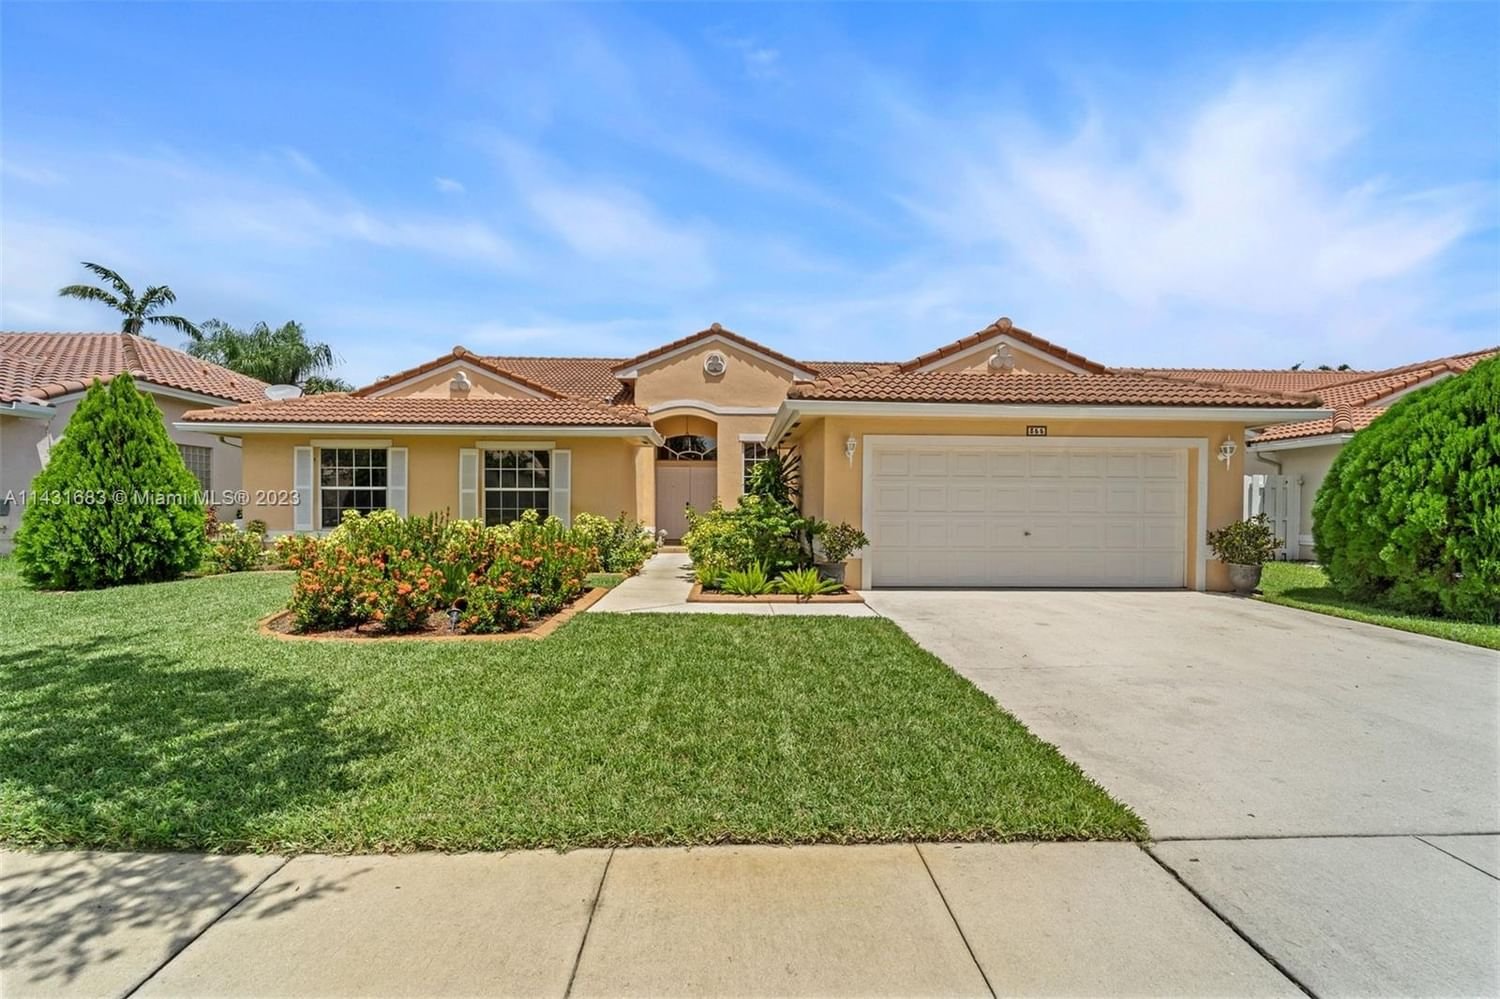 Real estate property located at 355 188th Ave, Broward County, Pembroke Pines, FL